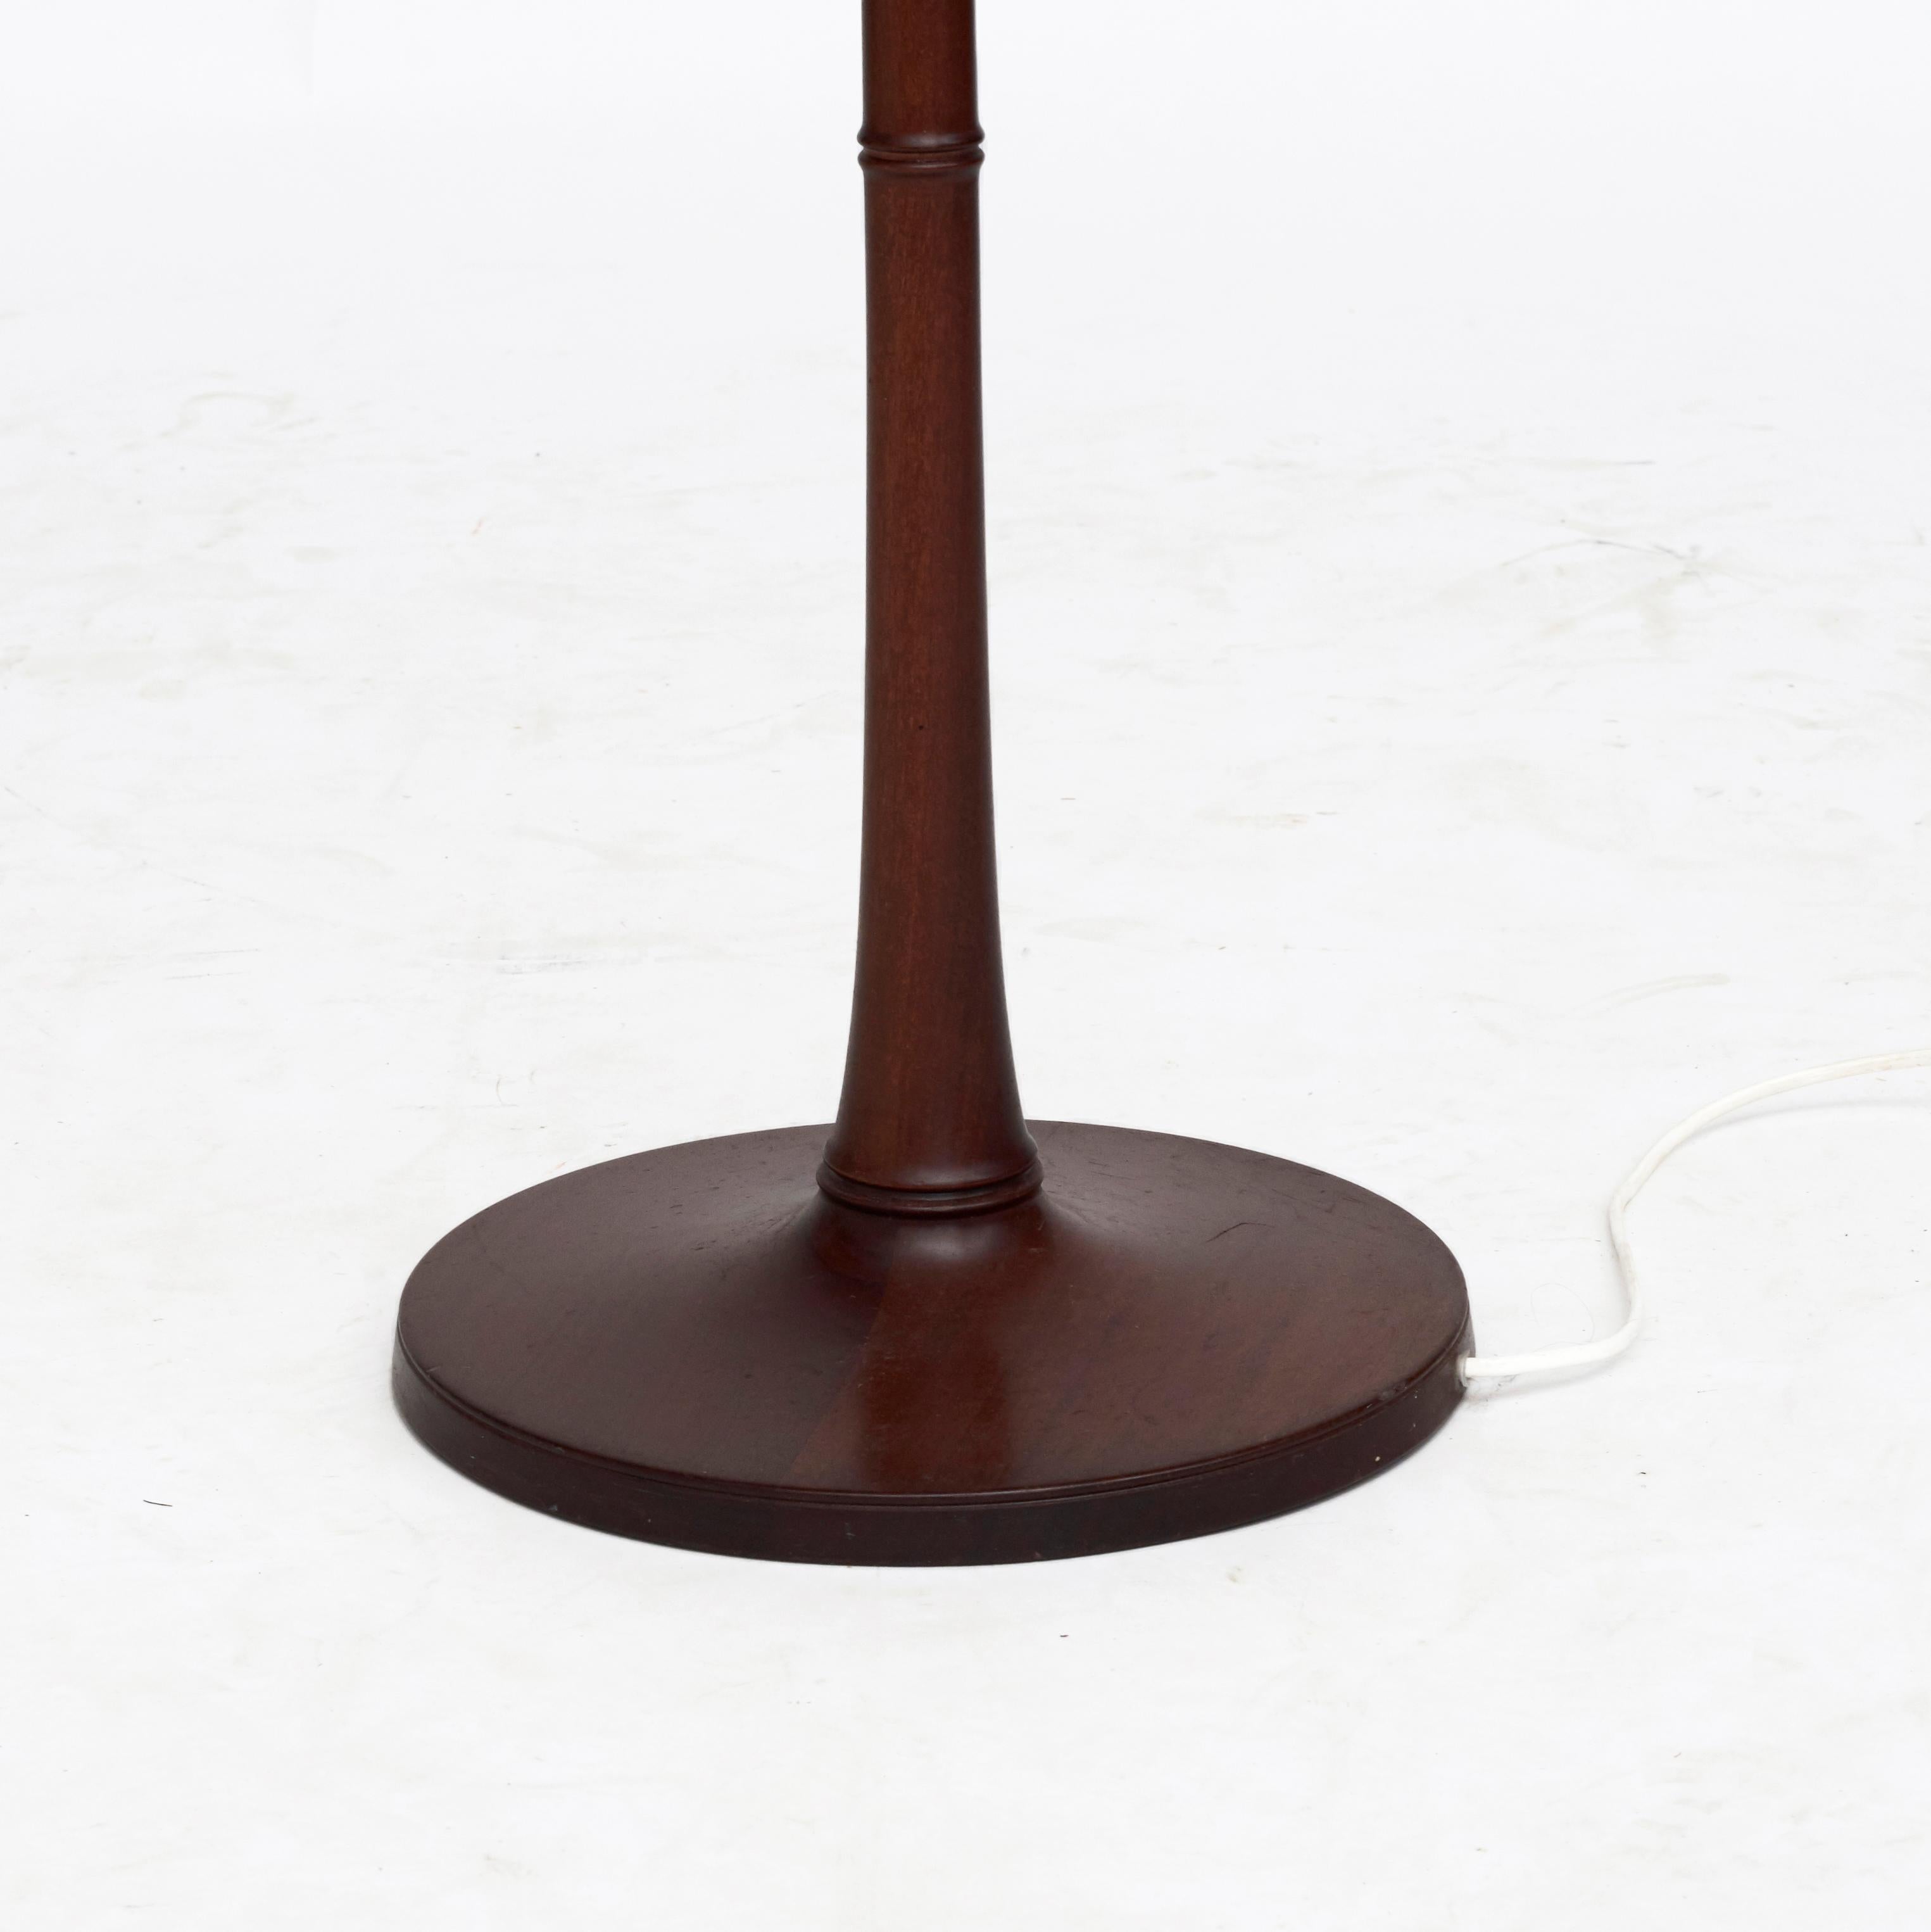 Kaare Klint (1888, Frederiksberg – 1954, Copenhagen).
Floor lamp Model 301 in beautifully patinated solid mahogany.
Tapered turned stem with 'rings'.
 
The lamp was designed by Kaare Klint in the 1940s. It went out of production in the 1960s and